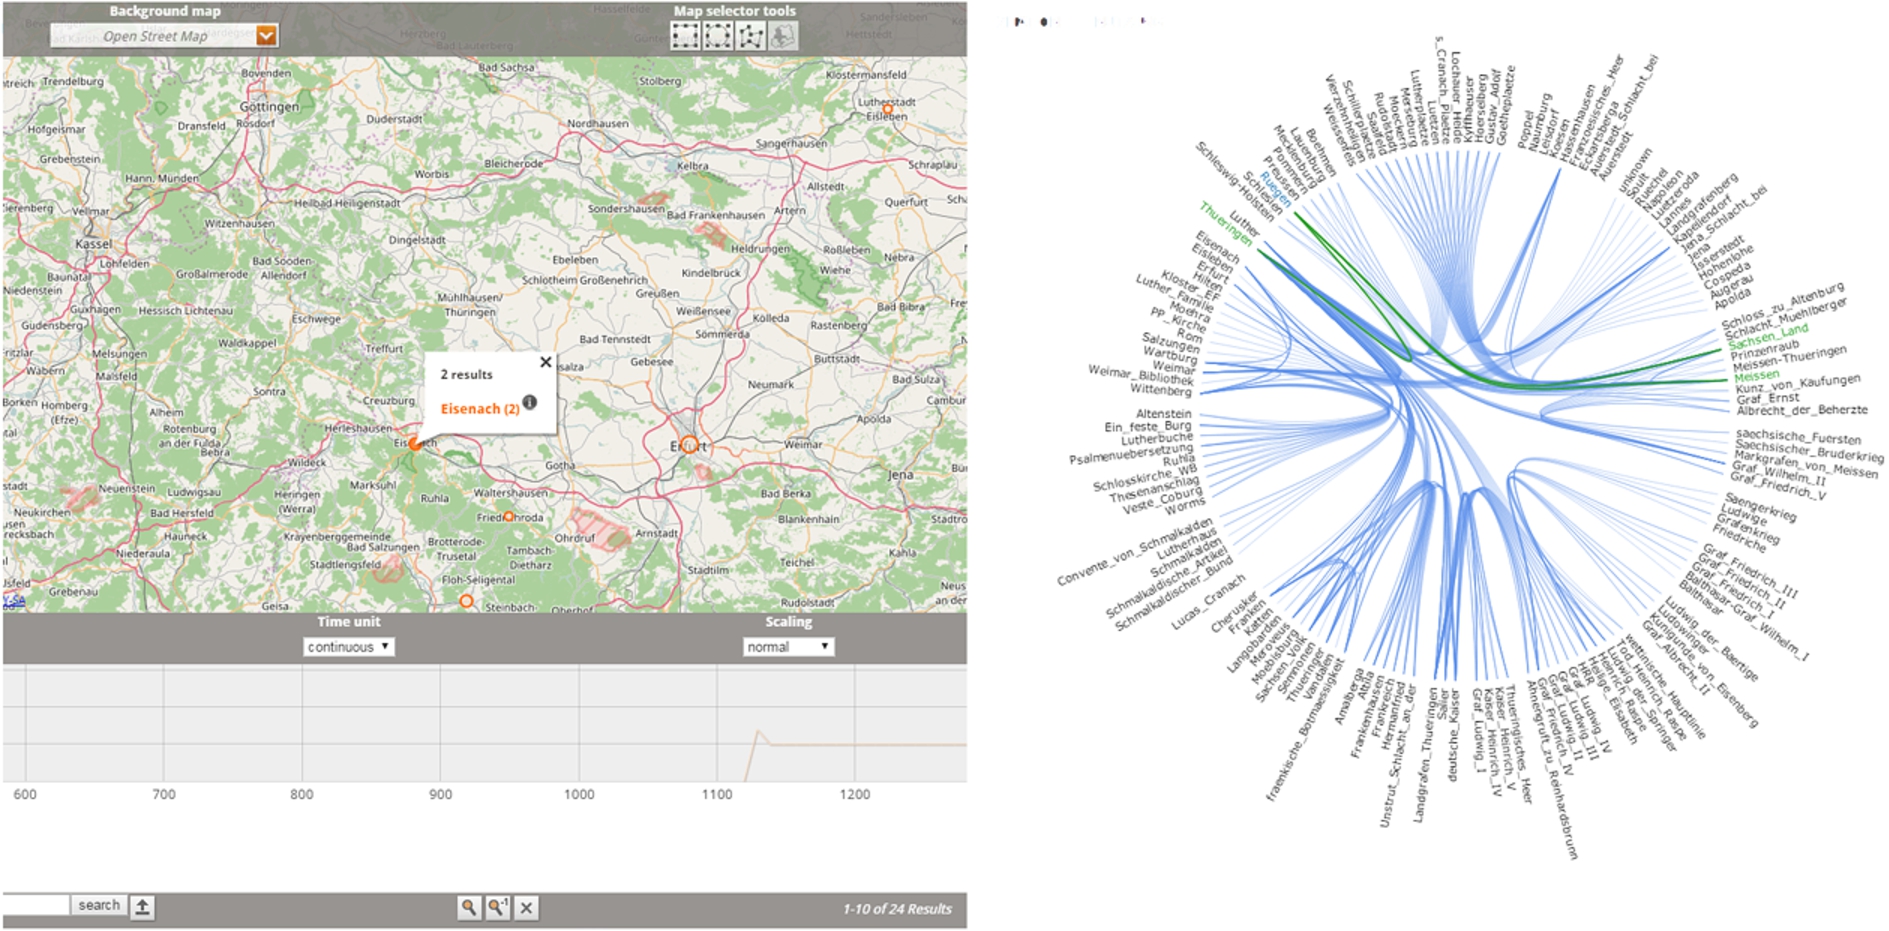 On the left the DARIAH-DE GeoBrowser applying geolocated data from the edition. On the right a network visualisation displaying relations between various entities (person, locations, works) on an interactive reel.